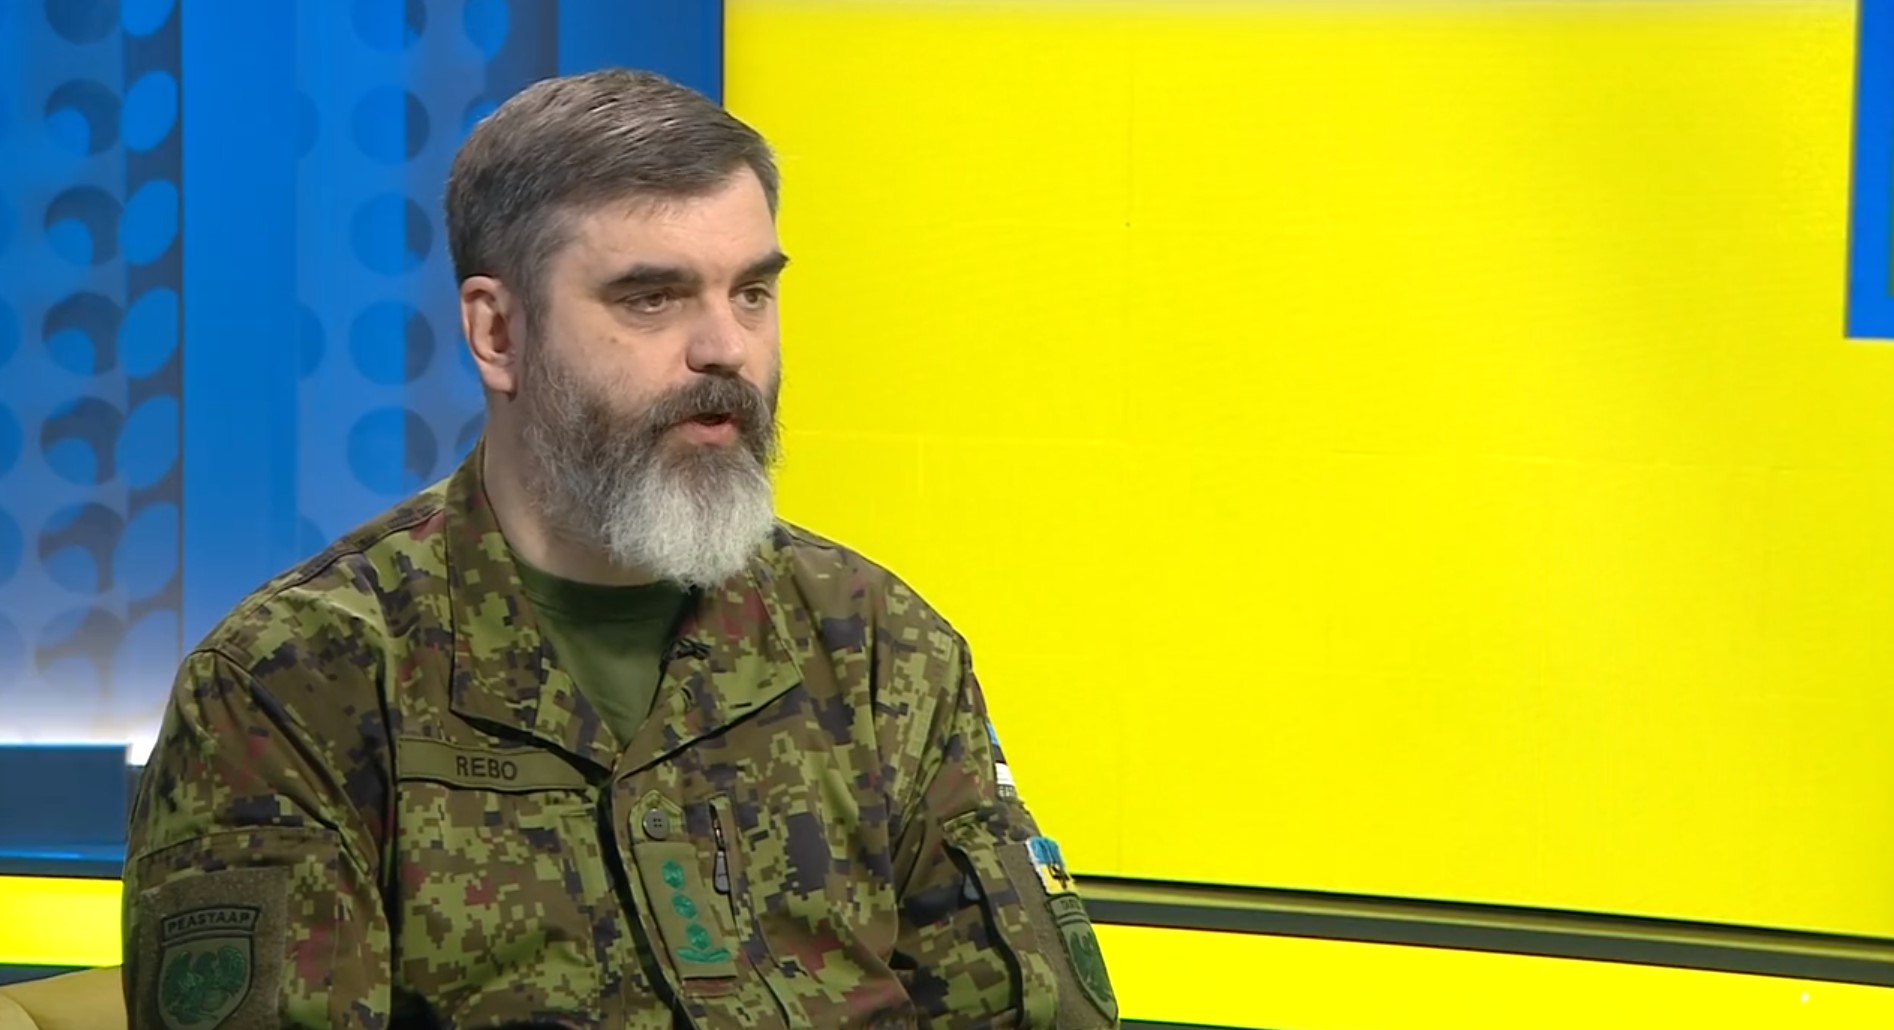 Colonel Eero Rebo: Russian forces gain ground in Ukraine with superior artillery and drone tactics